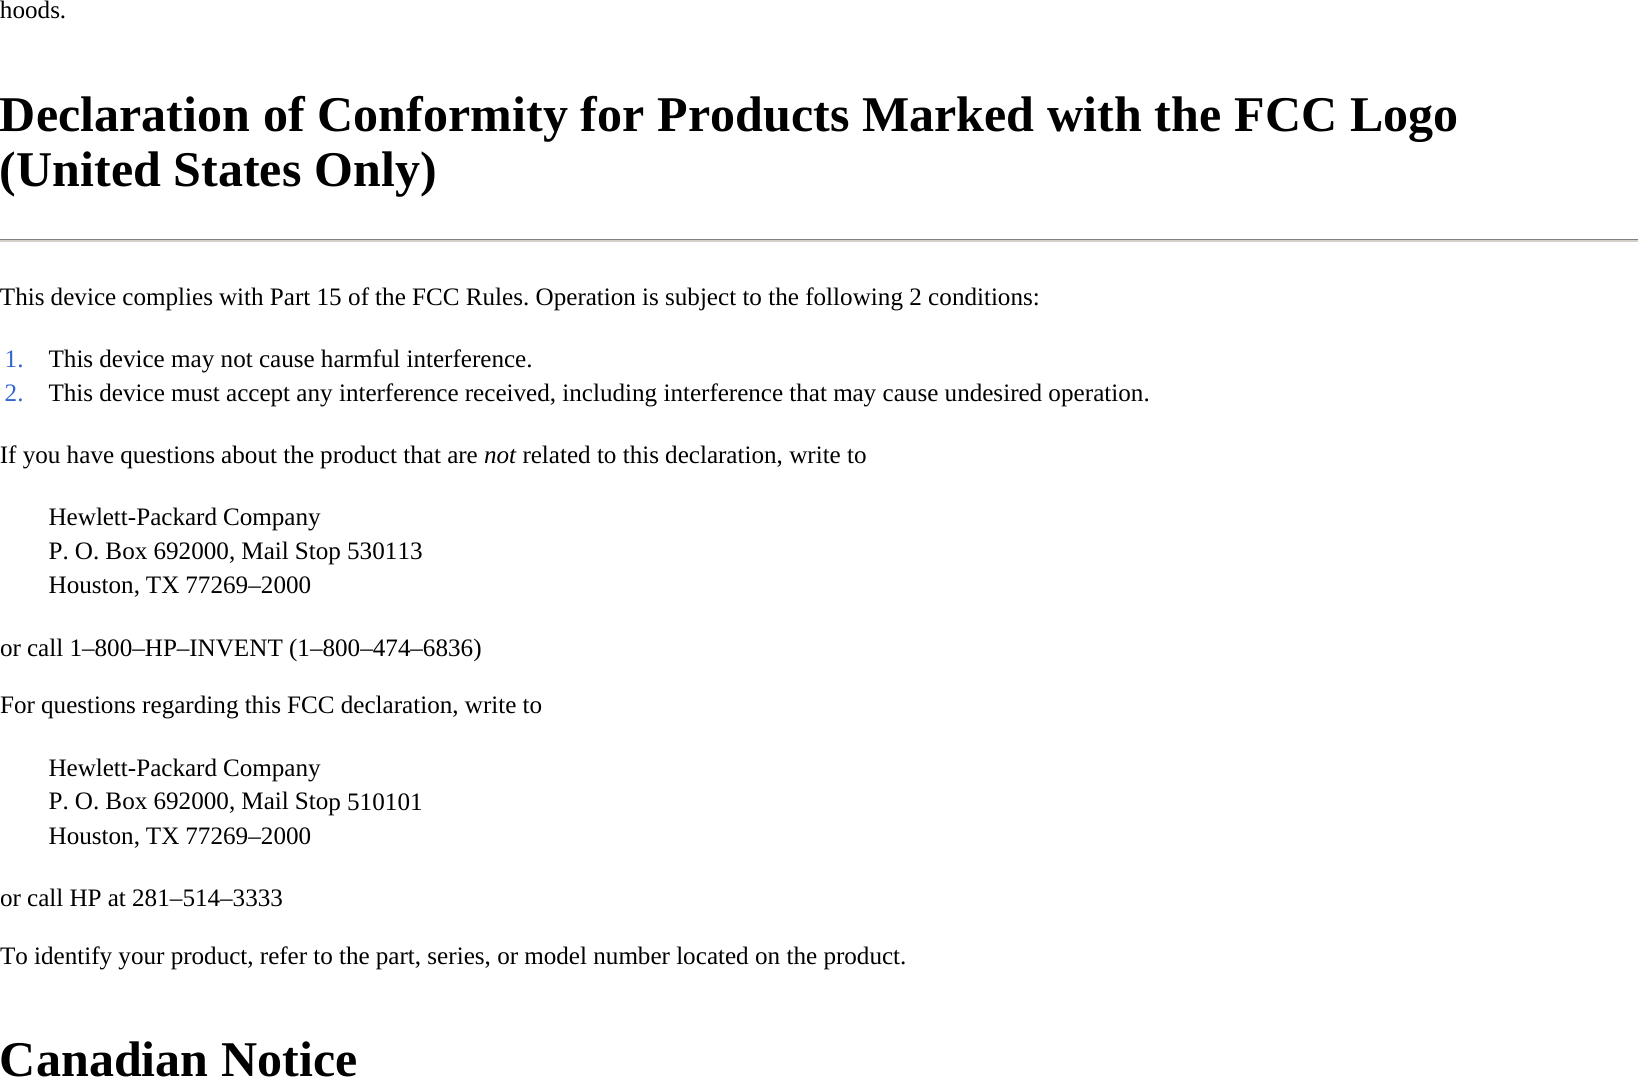 hoods.  Declaration of Conformity for Products Marked with the FCC Logo (United States Only)  This device complies with Part 15 of the FCC Rules. Operation is subject to the following 2 conditions:  If you have questions about the product that are not related to this declaration, write to  or call 1–800–HP–INVENT (1–800–474–6836)  For questions regarding this FCC declaration, write to  or call HP at 281–514–3333  To identify your product, refer to the part, series, or model number located on the product.  Canadian Notice  1. This device may not cause harmful interference.2. This device must accept any interference received, including interference that may cause undesired operation.Hewlett-Packard Company P. O. Box 692000, Mail Stop 530113Houston, TX 77269–2000 Hewlett-Packard Company P. O. Box 692000, Mail Stop 510101Houston, TX 77269–2000 